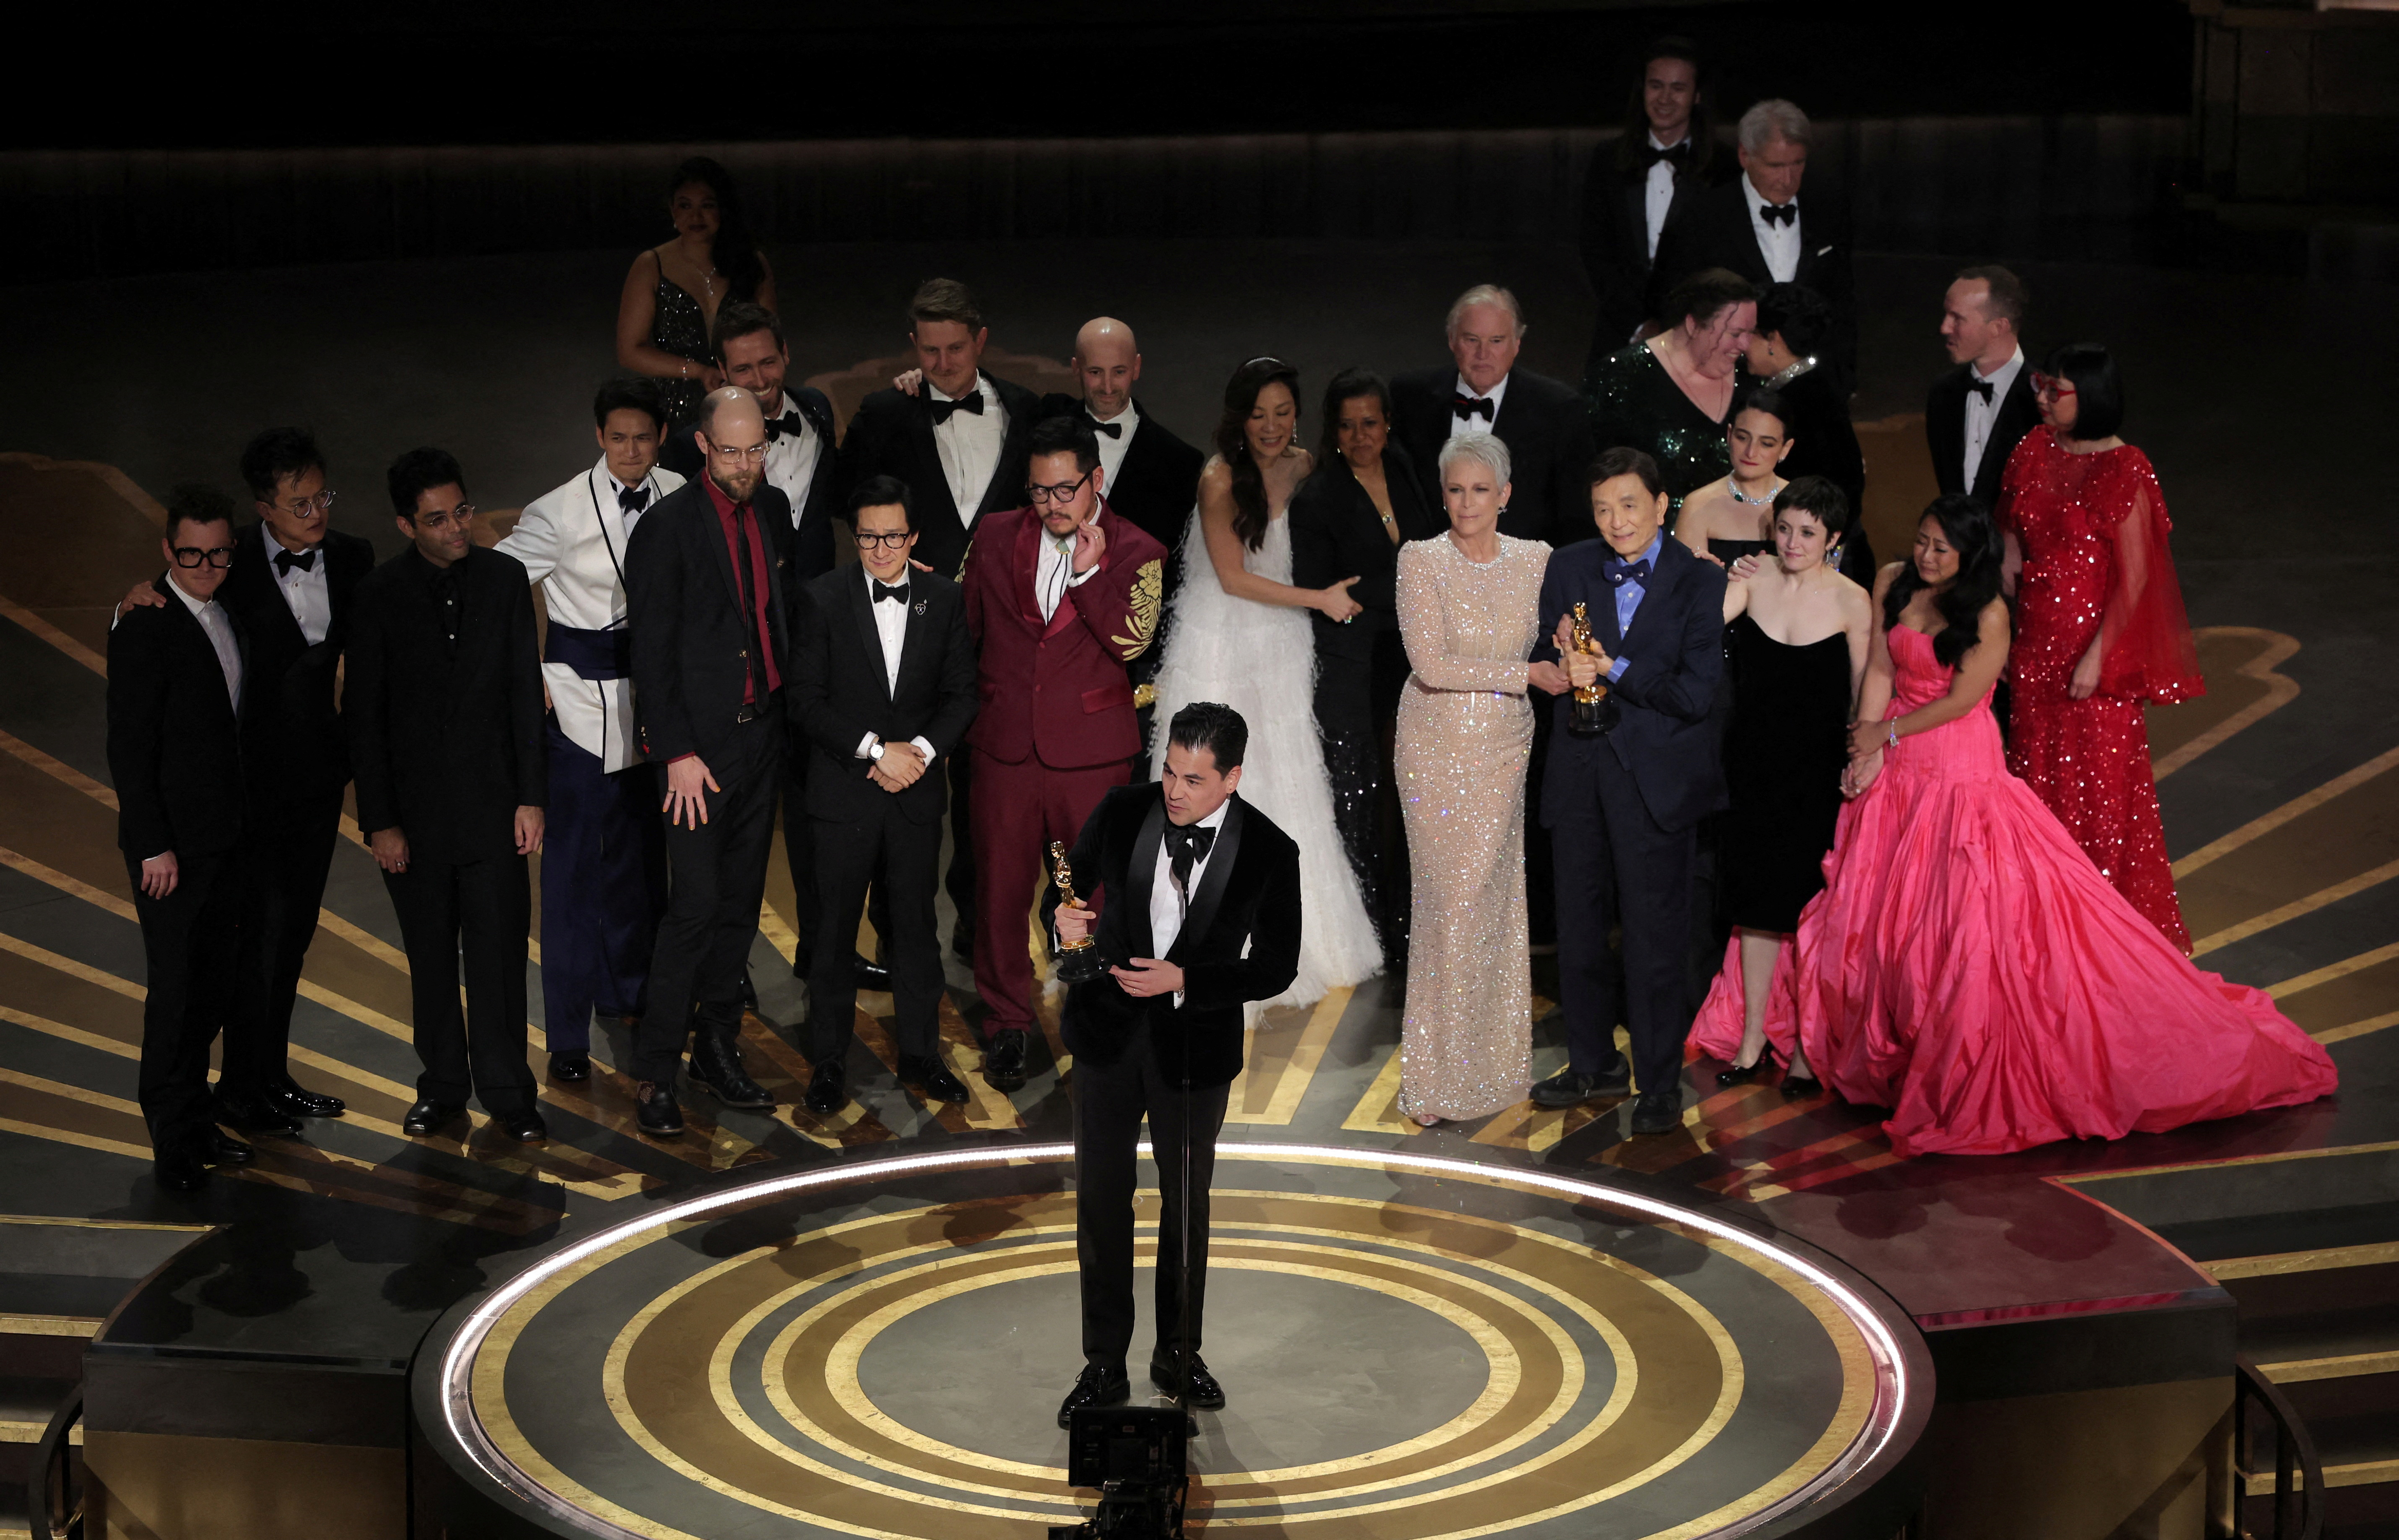 Rumored Relationships and The Oscars